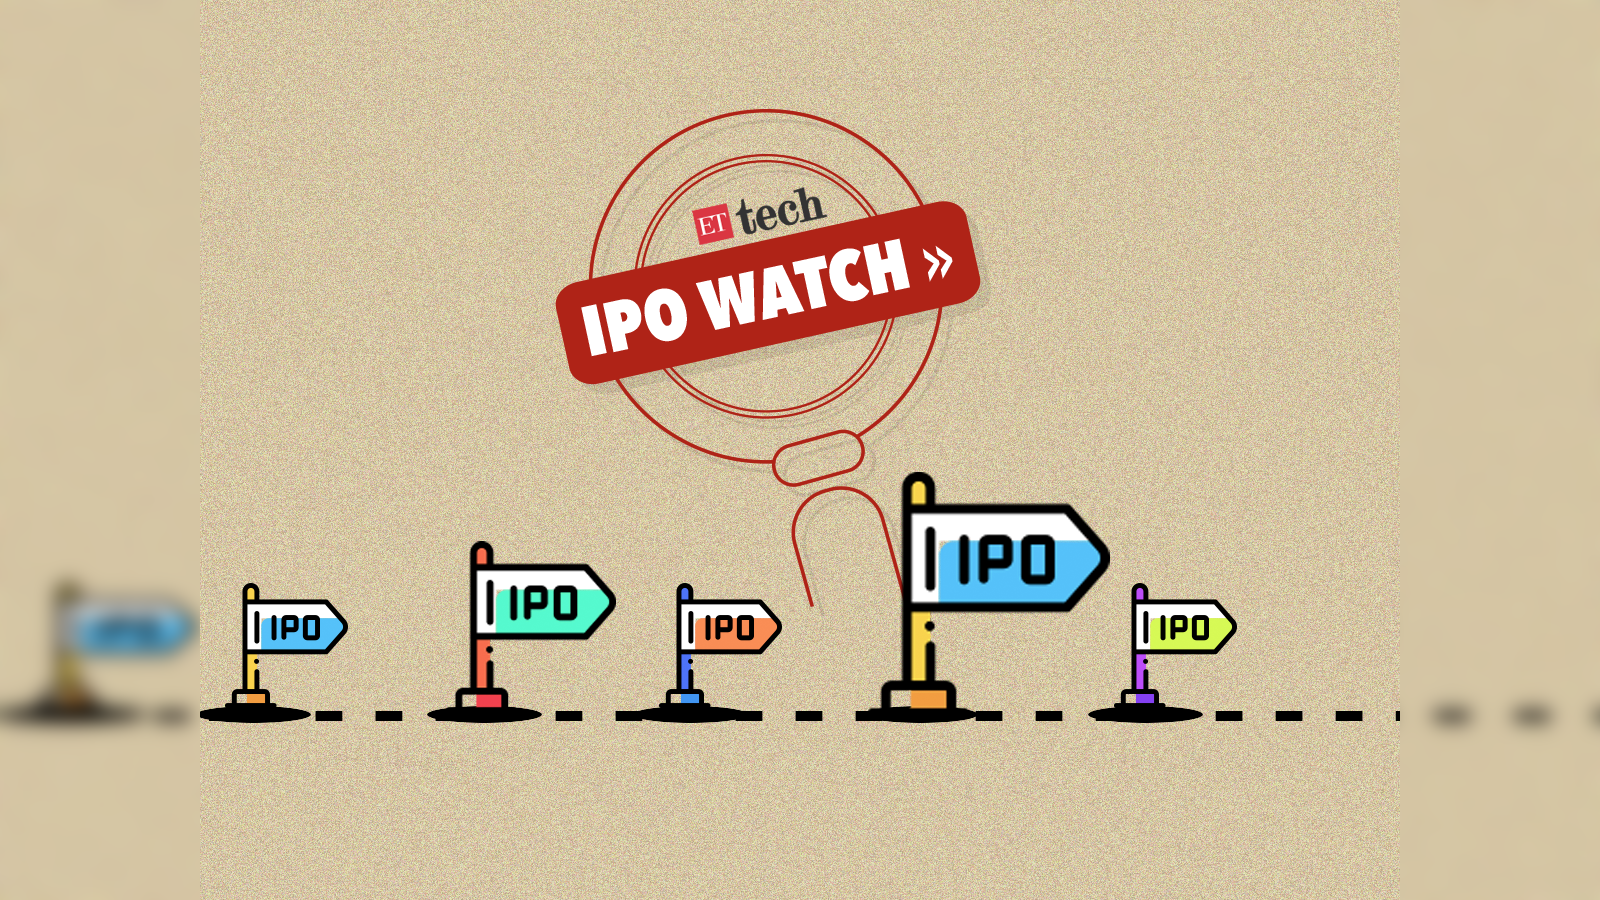 IPO Watch Apk Download for Android- Latest version 5.3- com.app.ipowatchapp-saigonsouth.com.vn